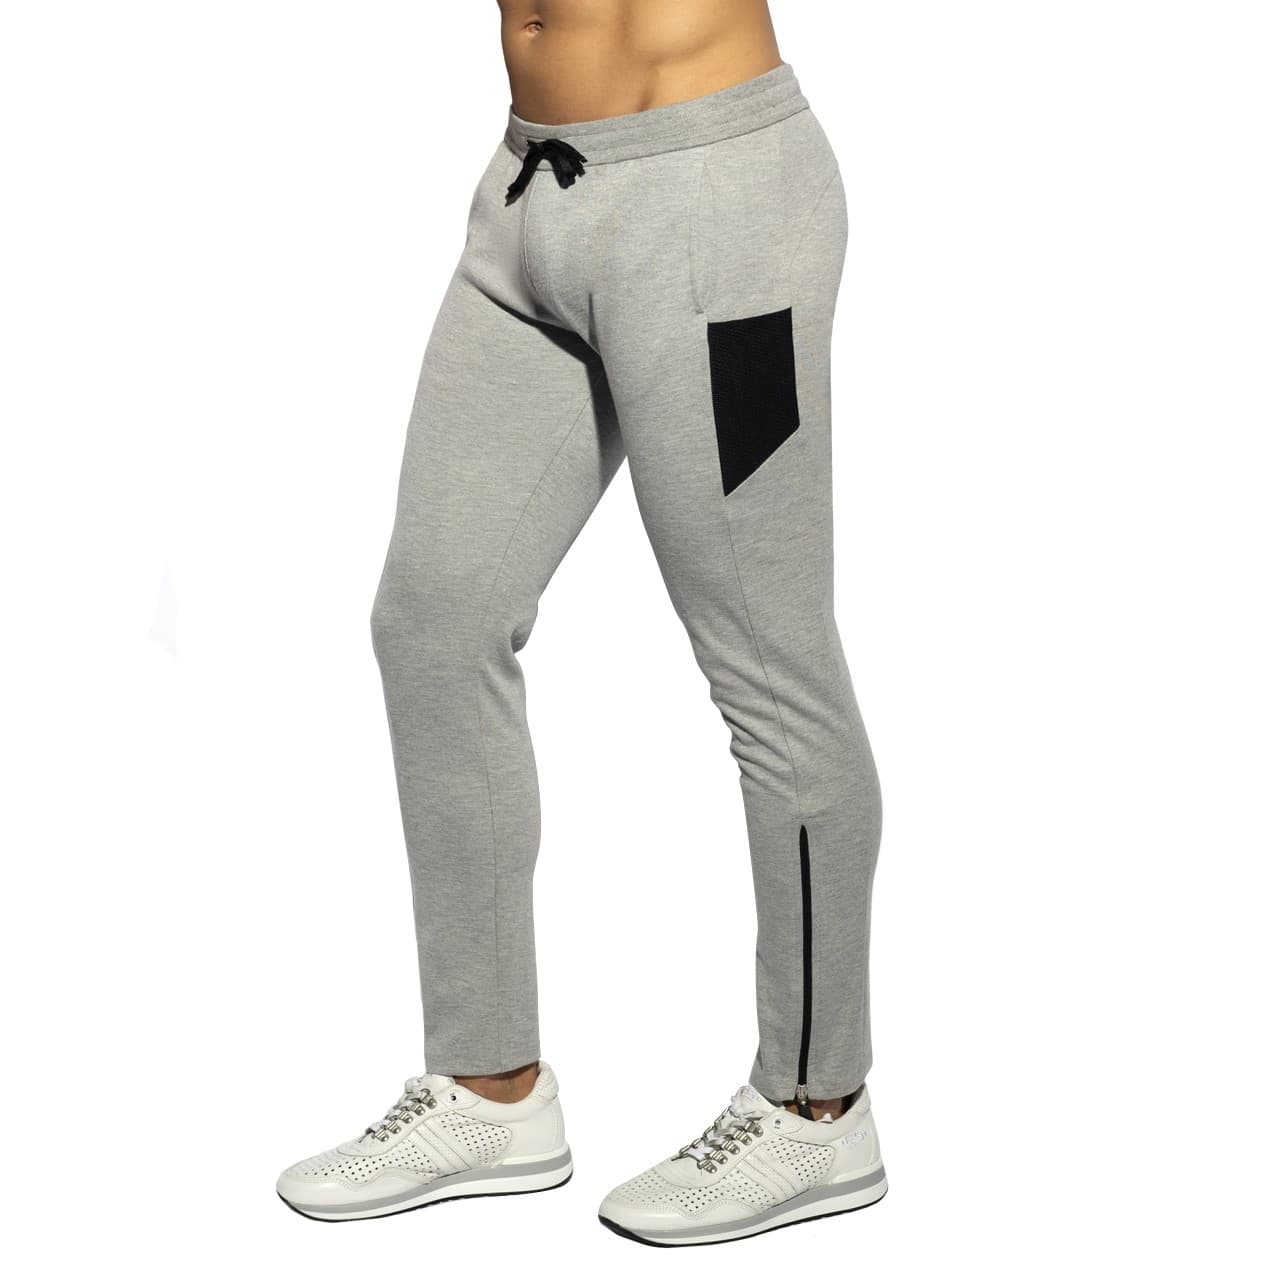 https://www.inderwear.com/151768/first-class-athletic-pants-heather-grey-es-collection.jpg